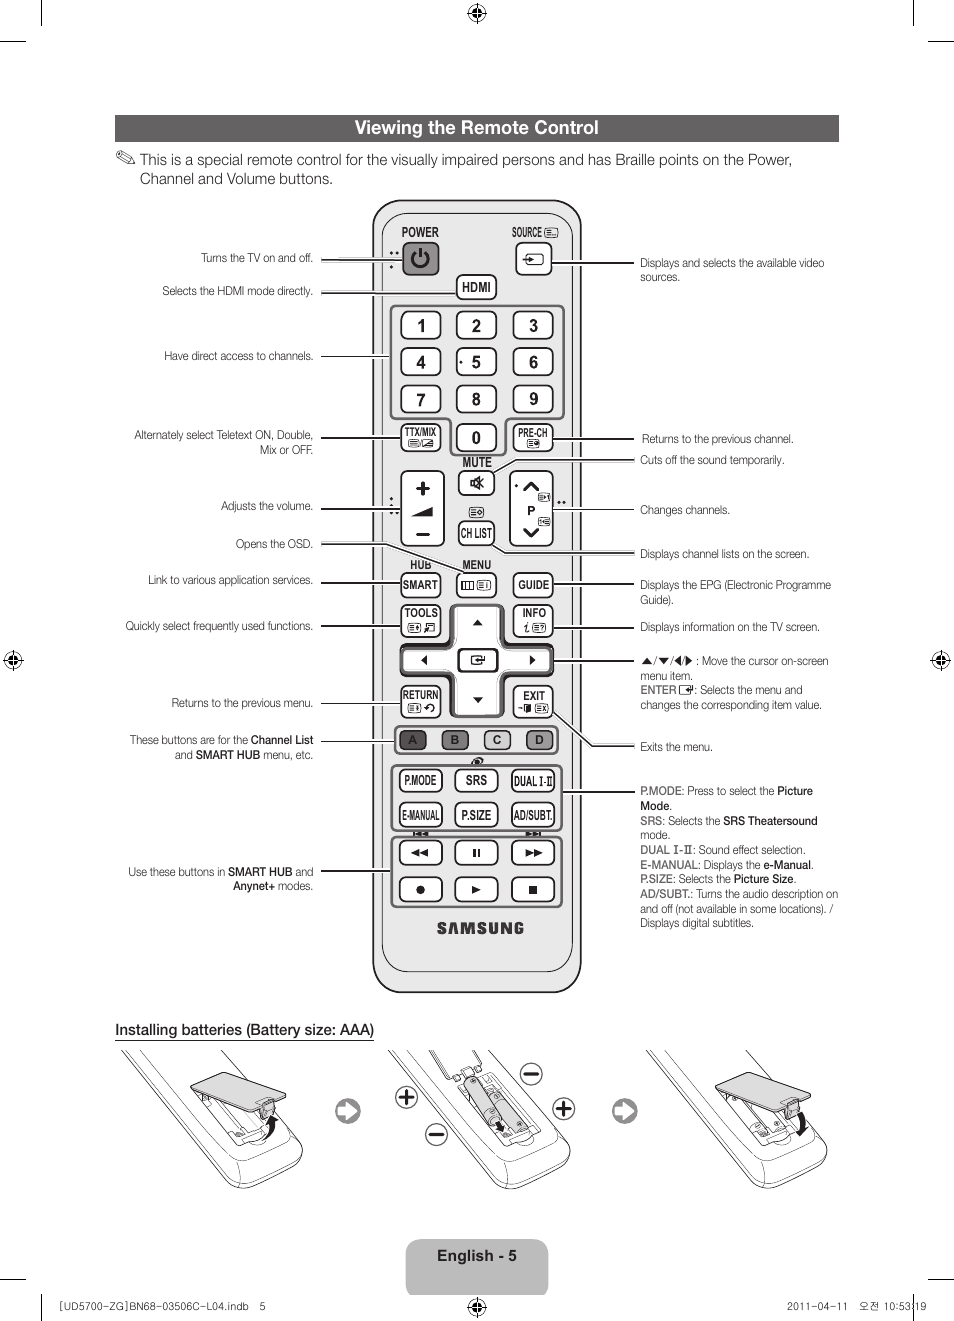 Viewing the remote control | Samsung UE40D5720RS User Manual | Page 5 / 80  | Original mode